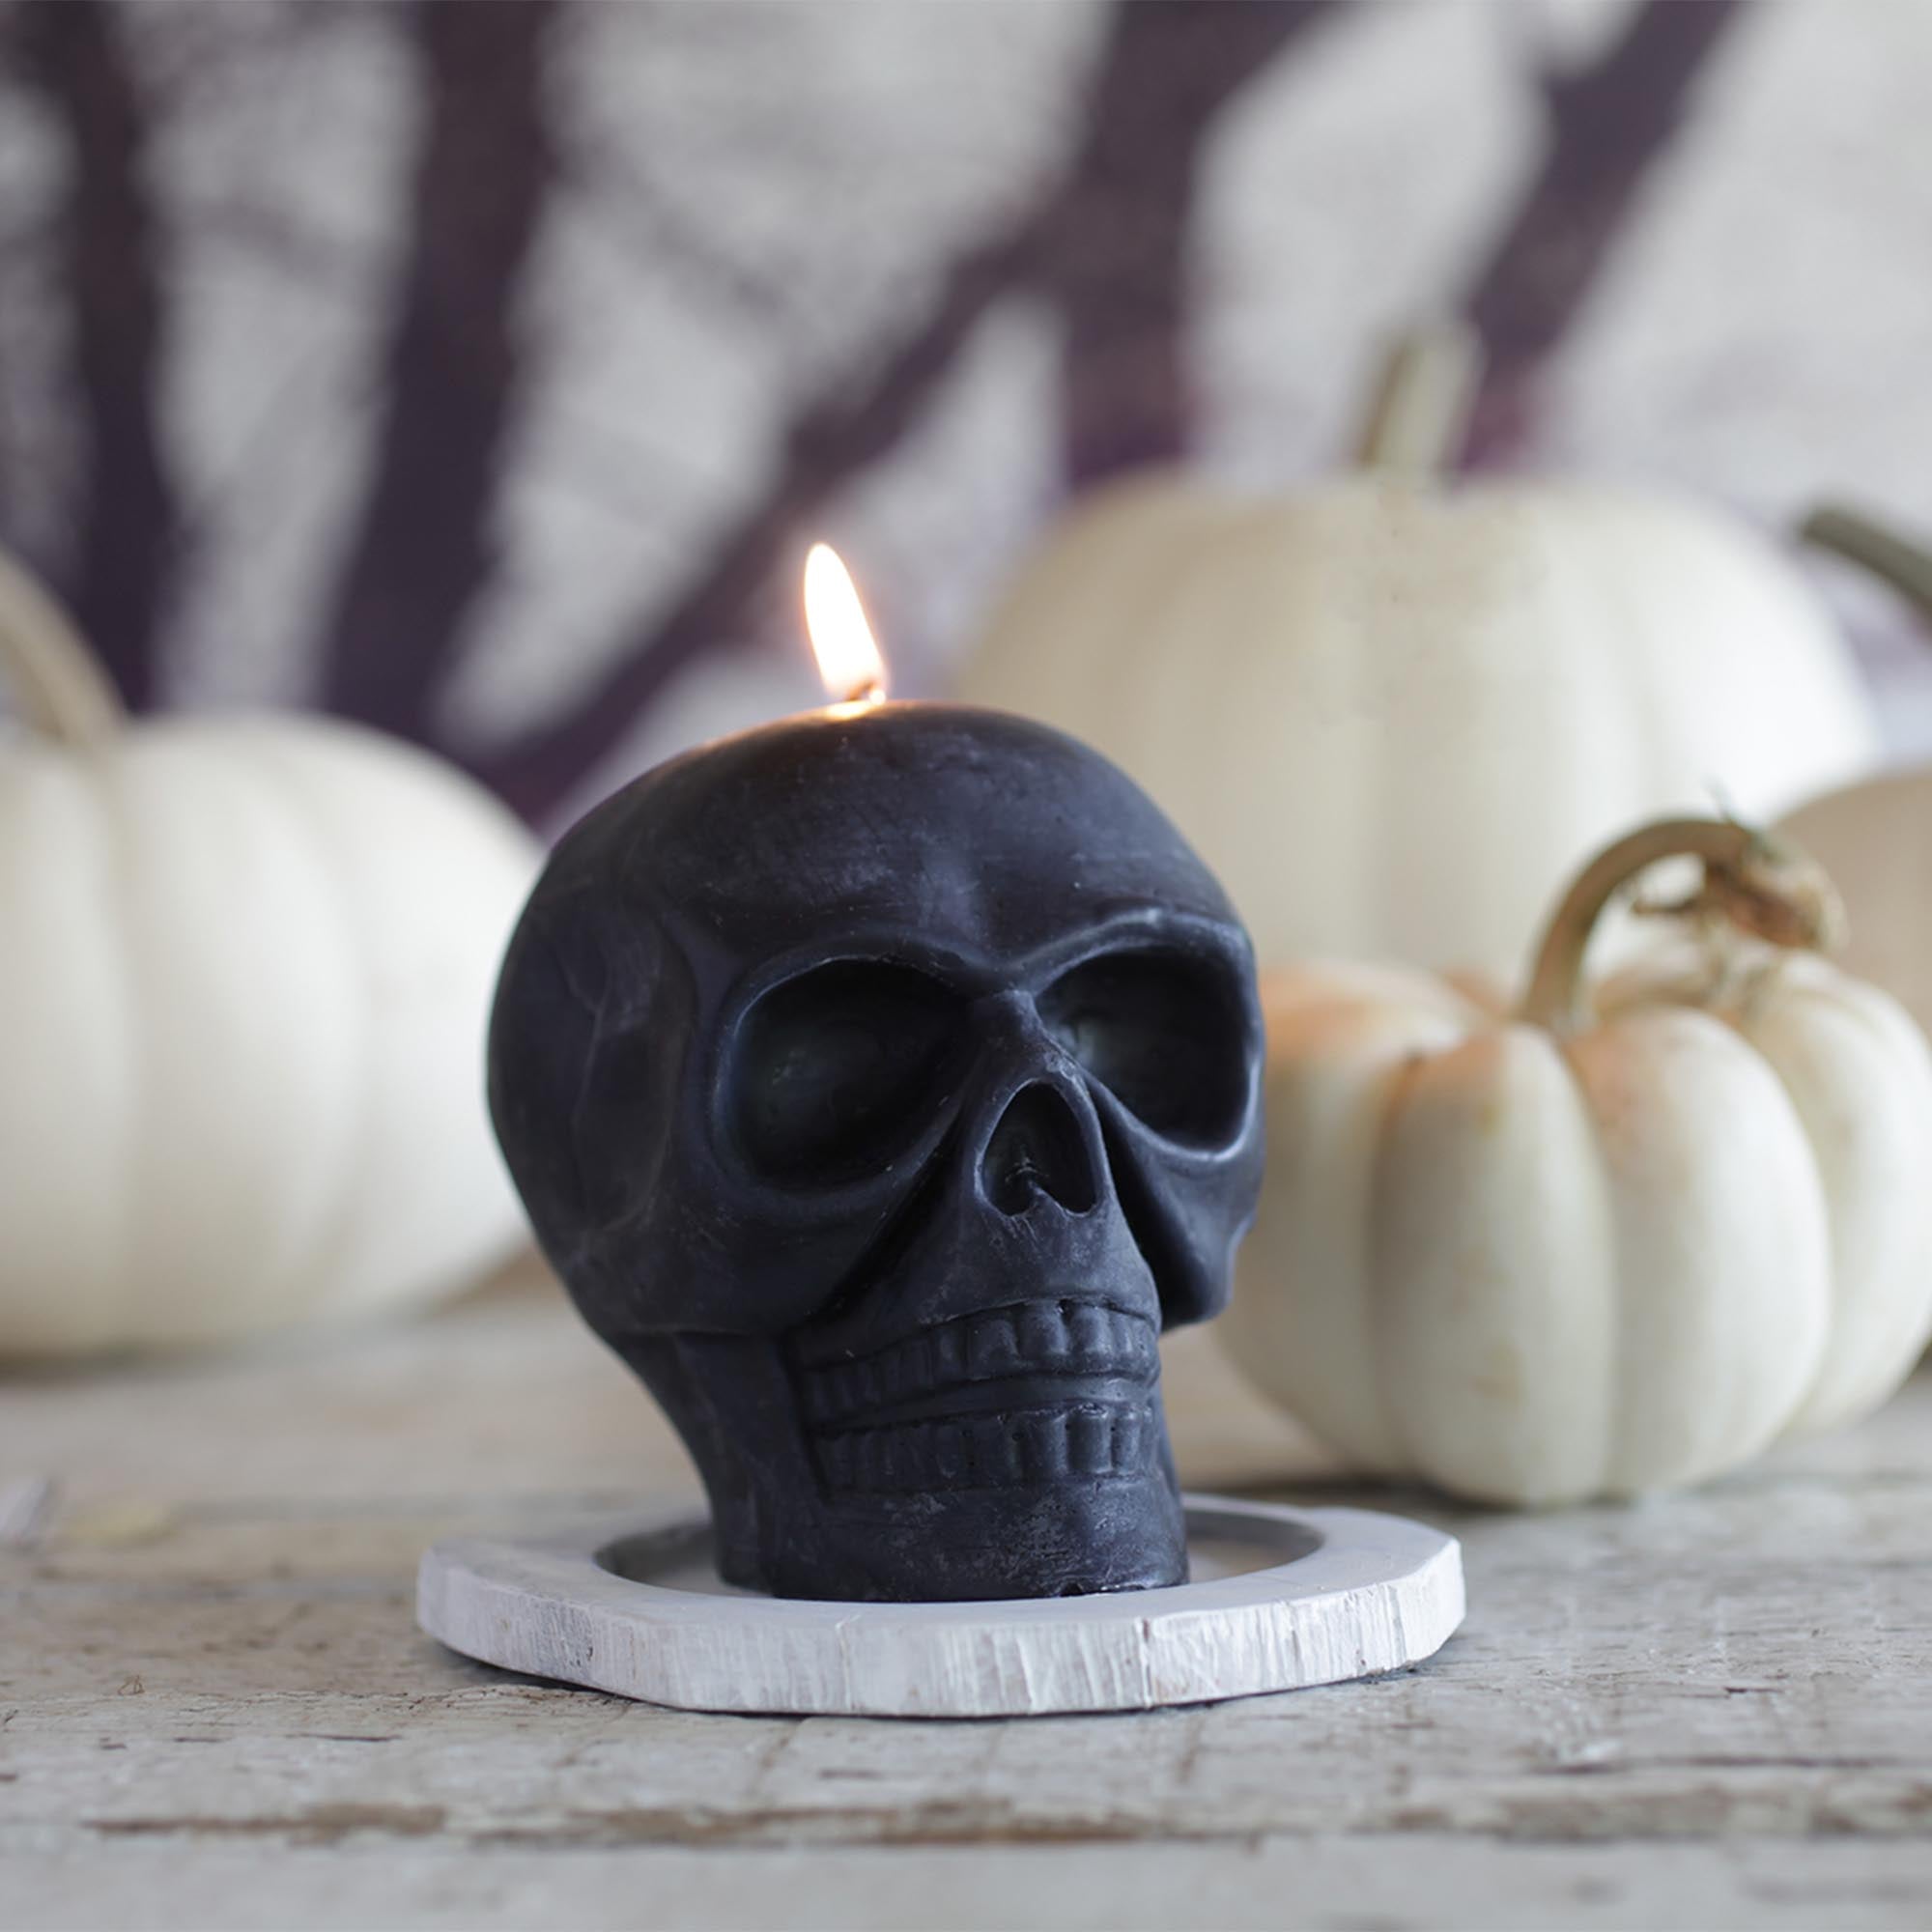 100% Pure Beeswax Skull Candle - What's Good